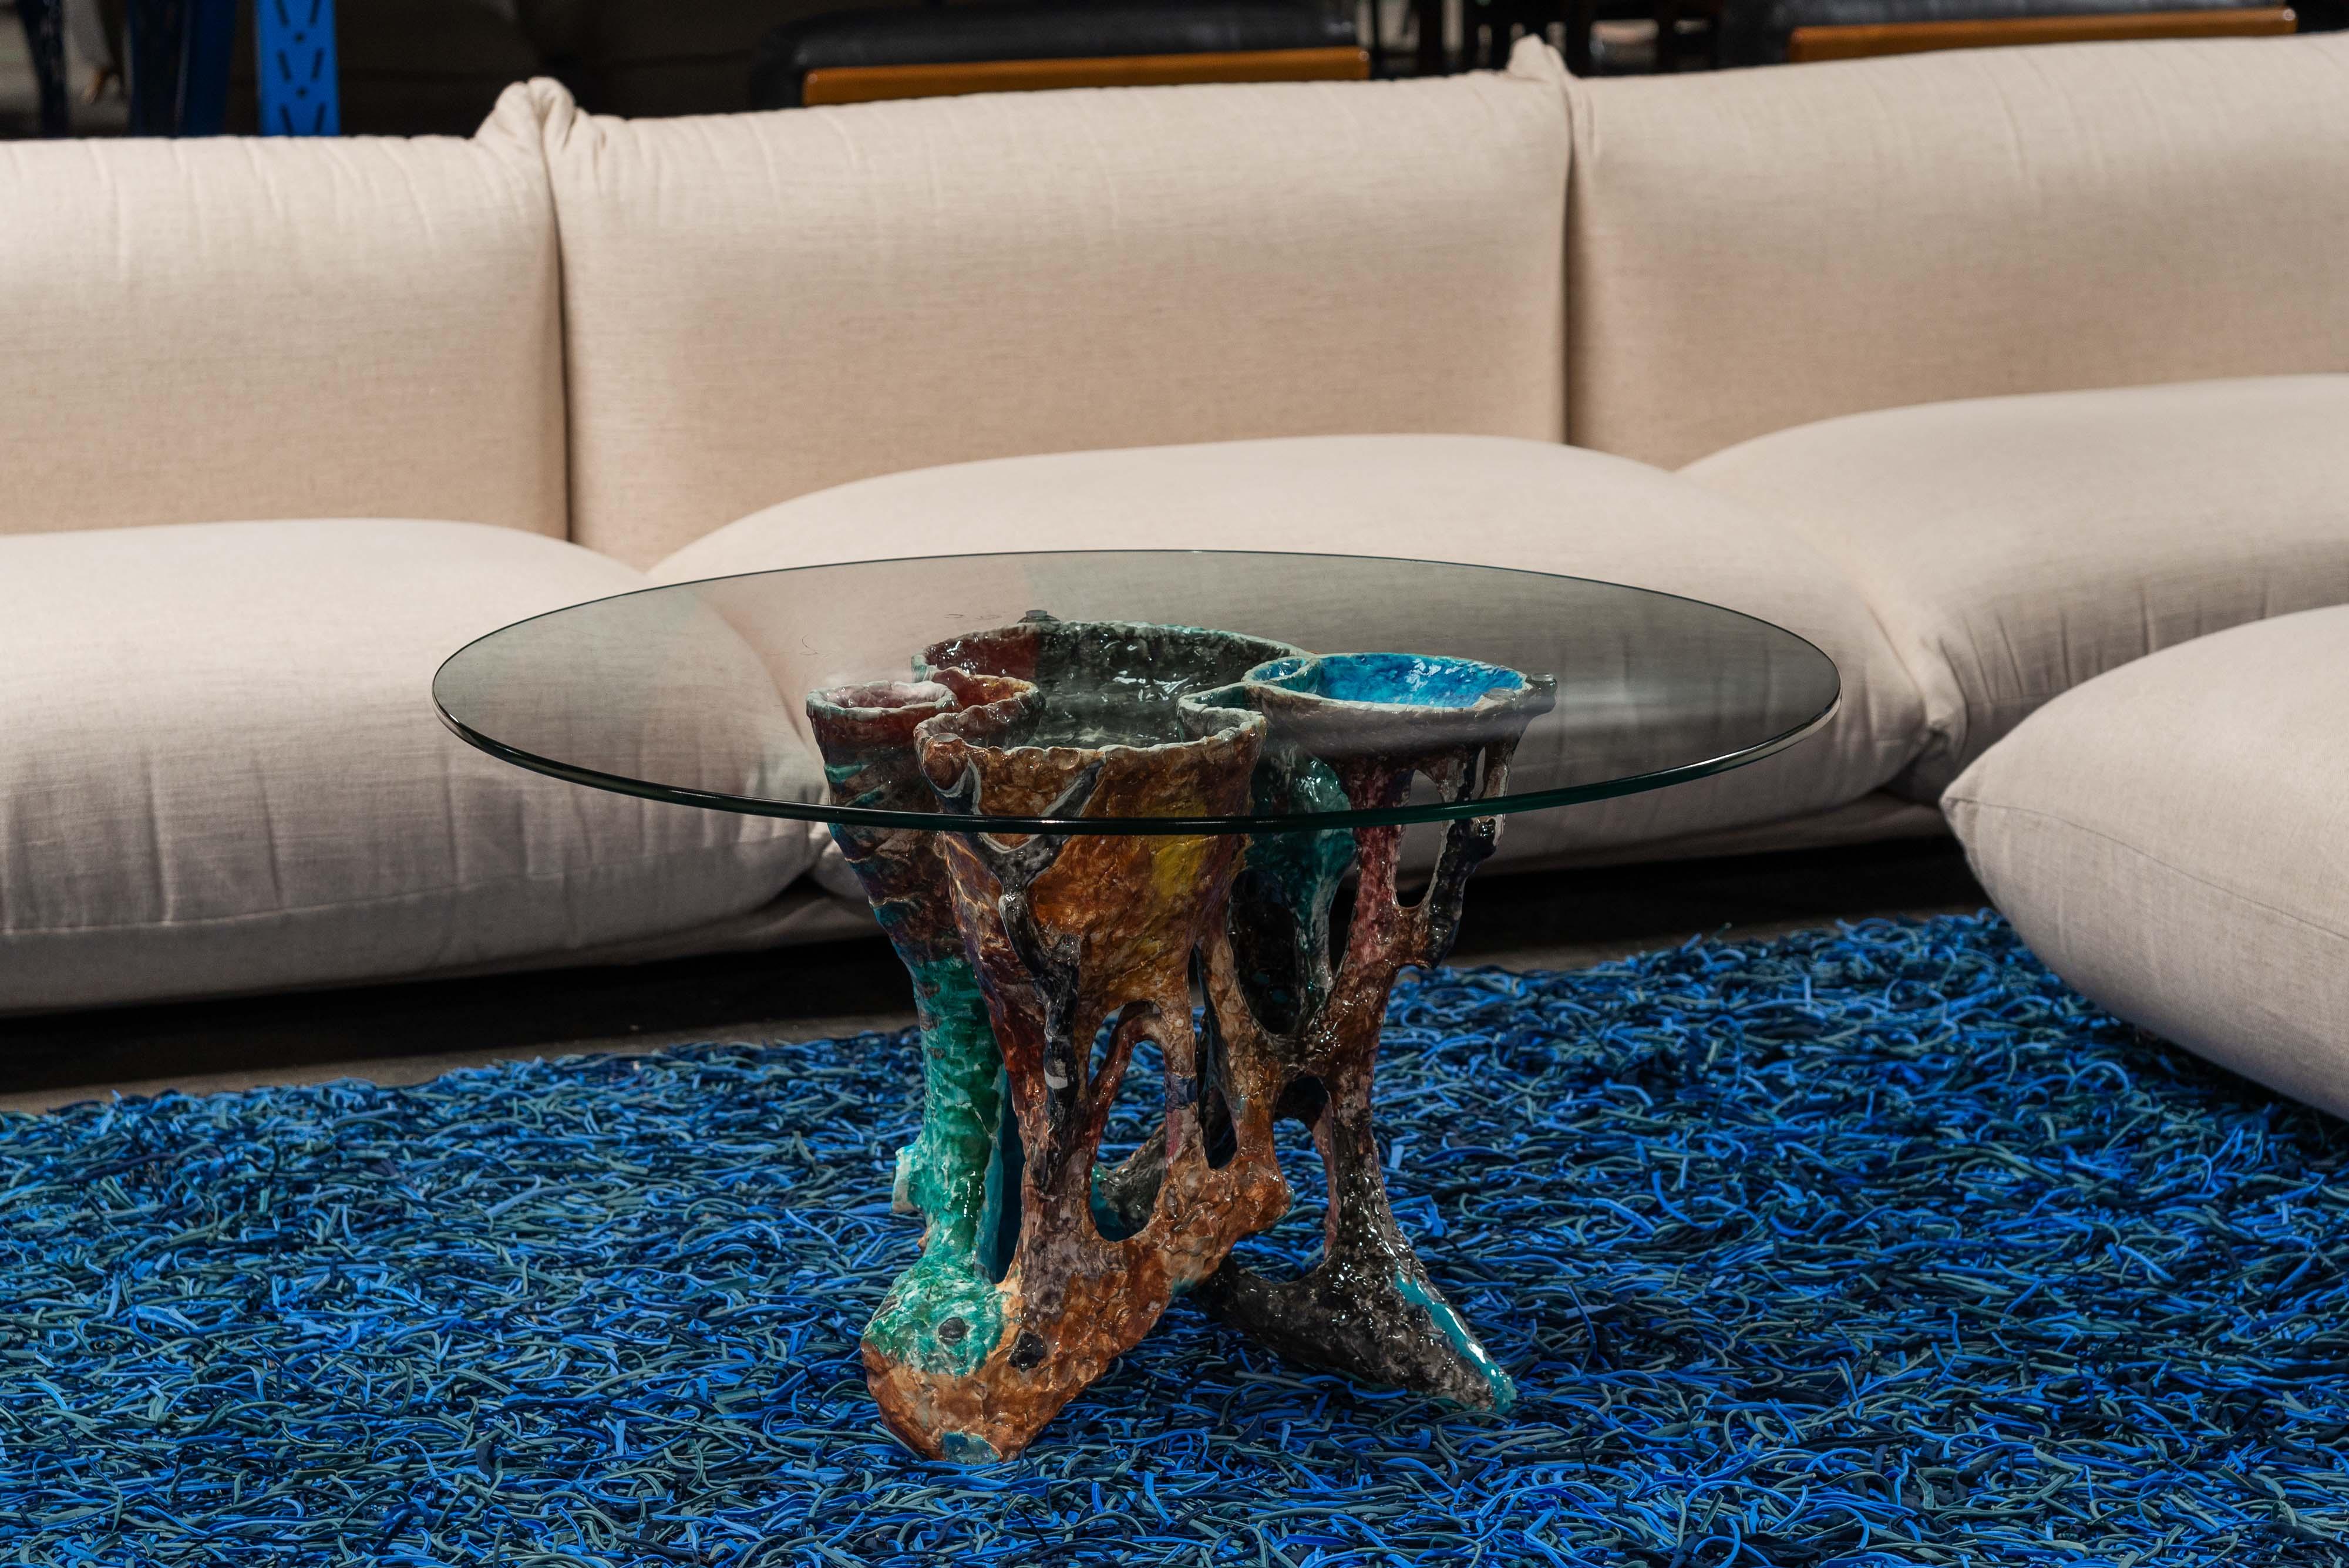 Astonishing coffee or side table designed and hand-made by Rolando Hettner in Italy in 1950s. Made of colourful glazed ceramic shaped like an ocean plant or coral. From the top, you'll see two circles and an infinity shape in the middle, all